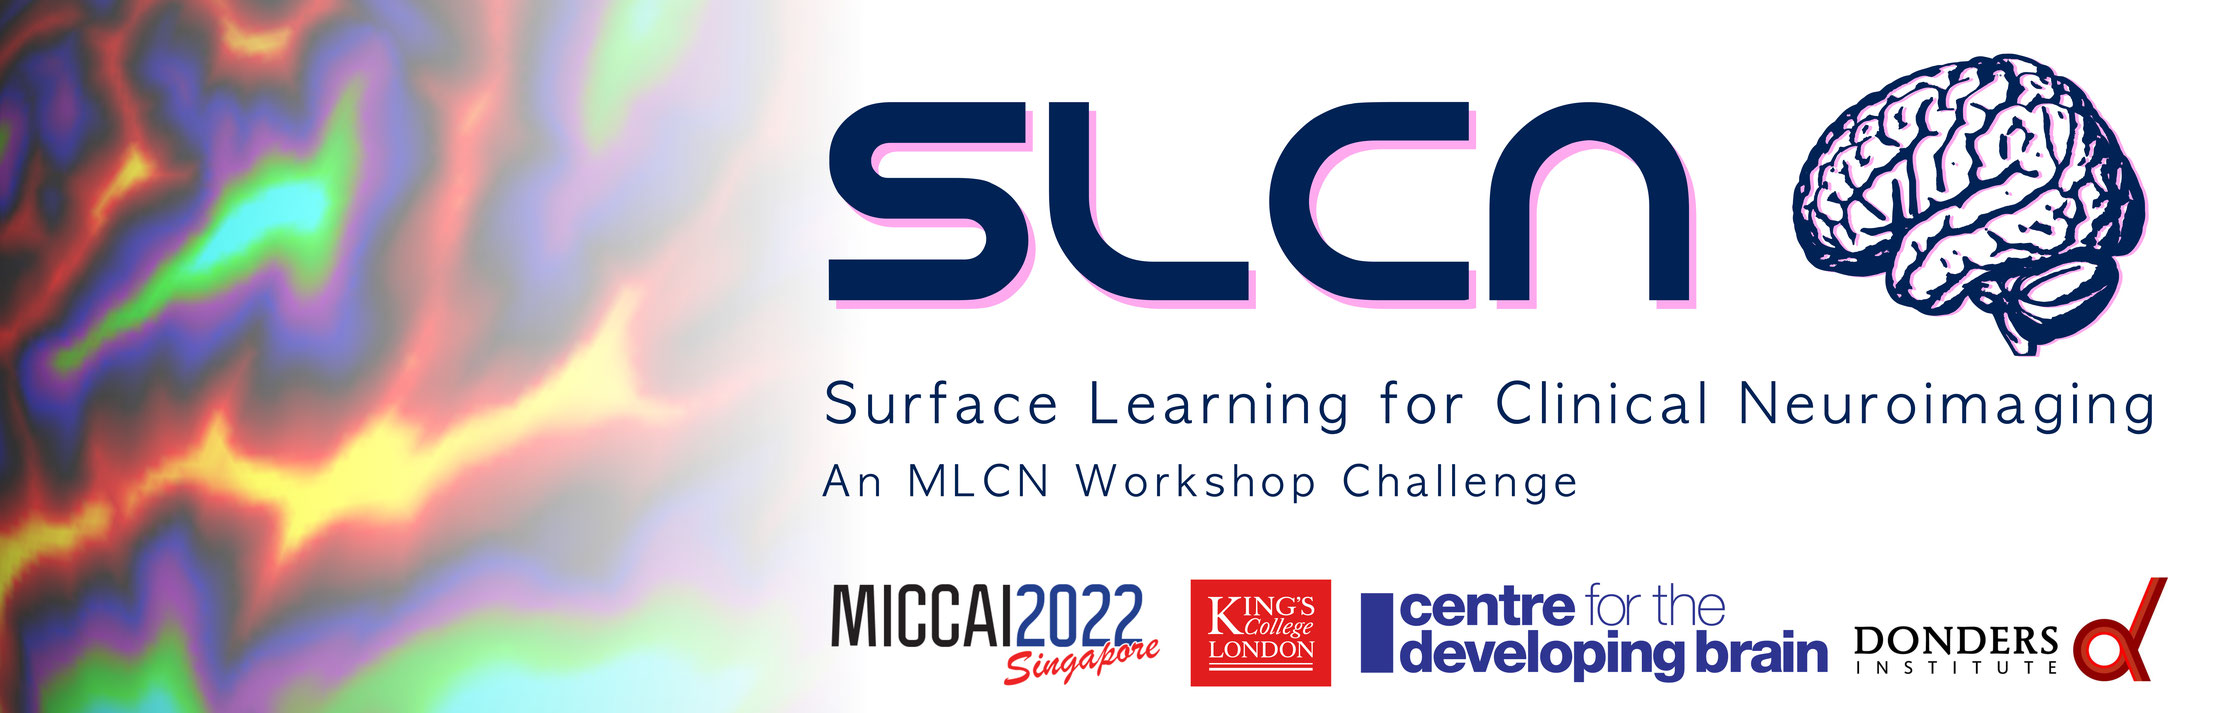 Surface Learning for Clinical Neuroimaging Banner